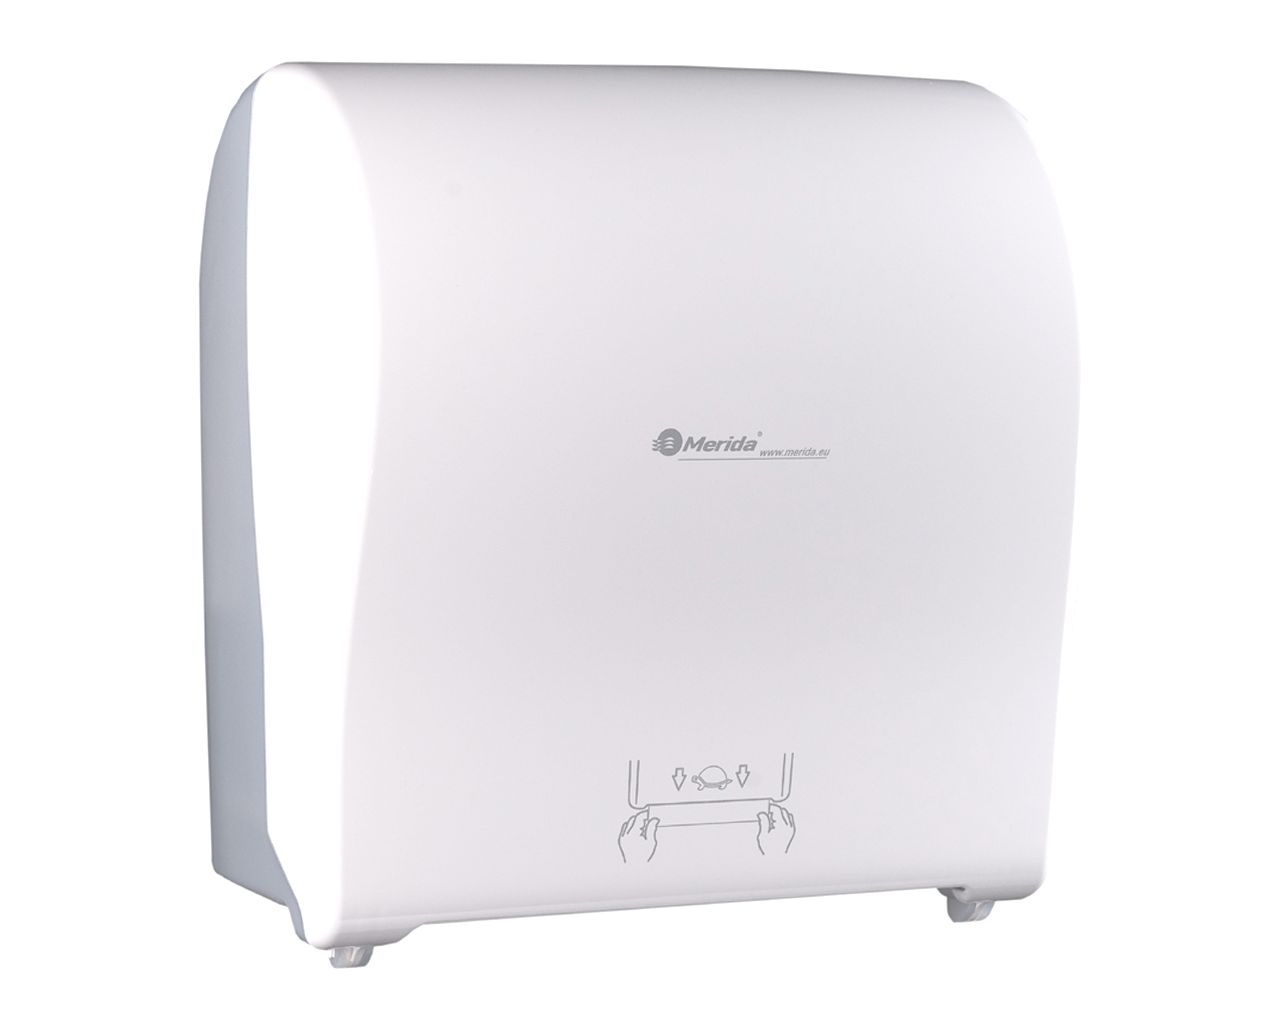 MERIDA SOLID CUT mechanical, touchless roll towel dispenser merida solid cut, maximum roll diameter: 19,5 cm, made of top quality abs (white)